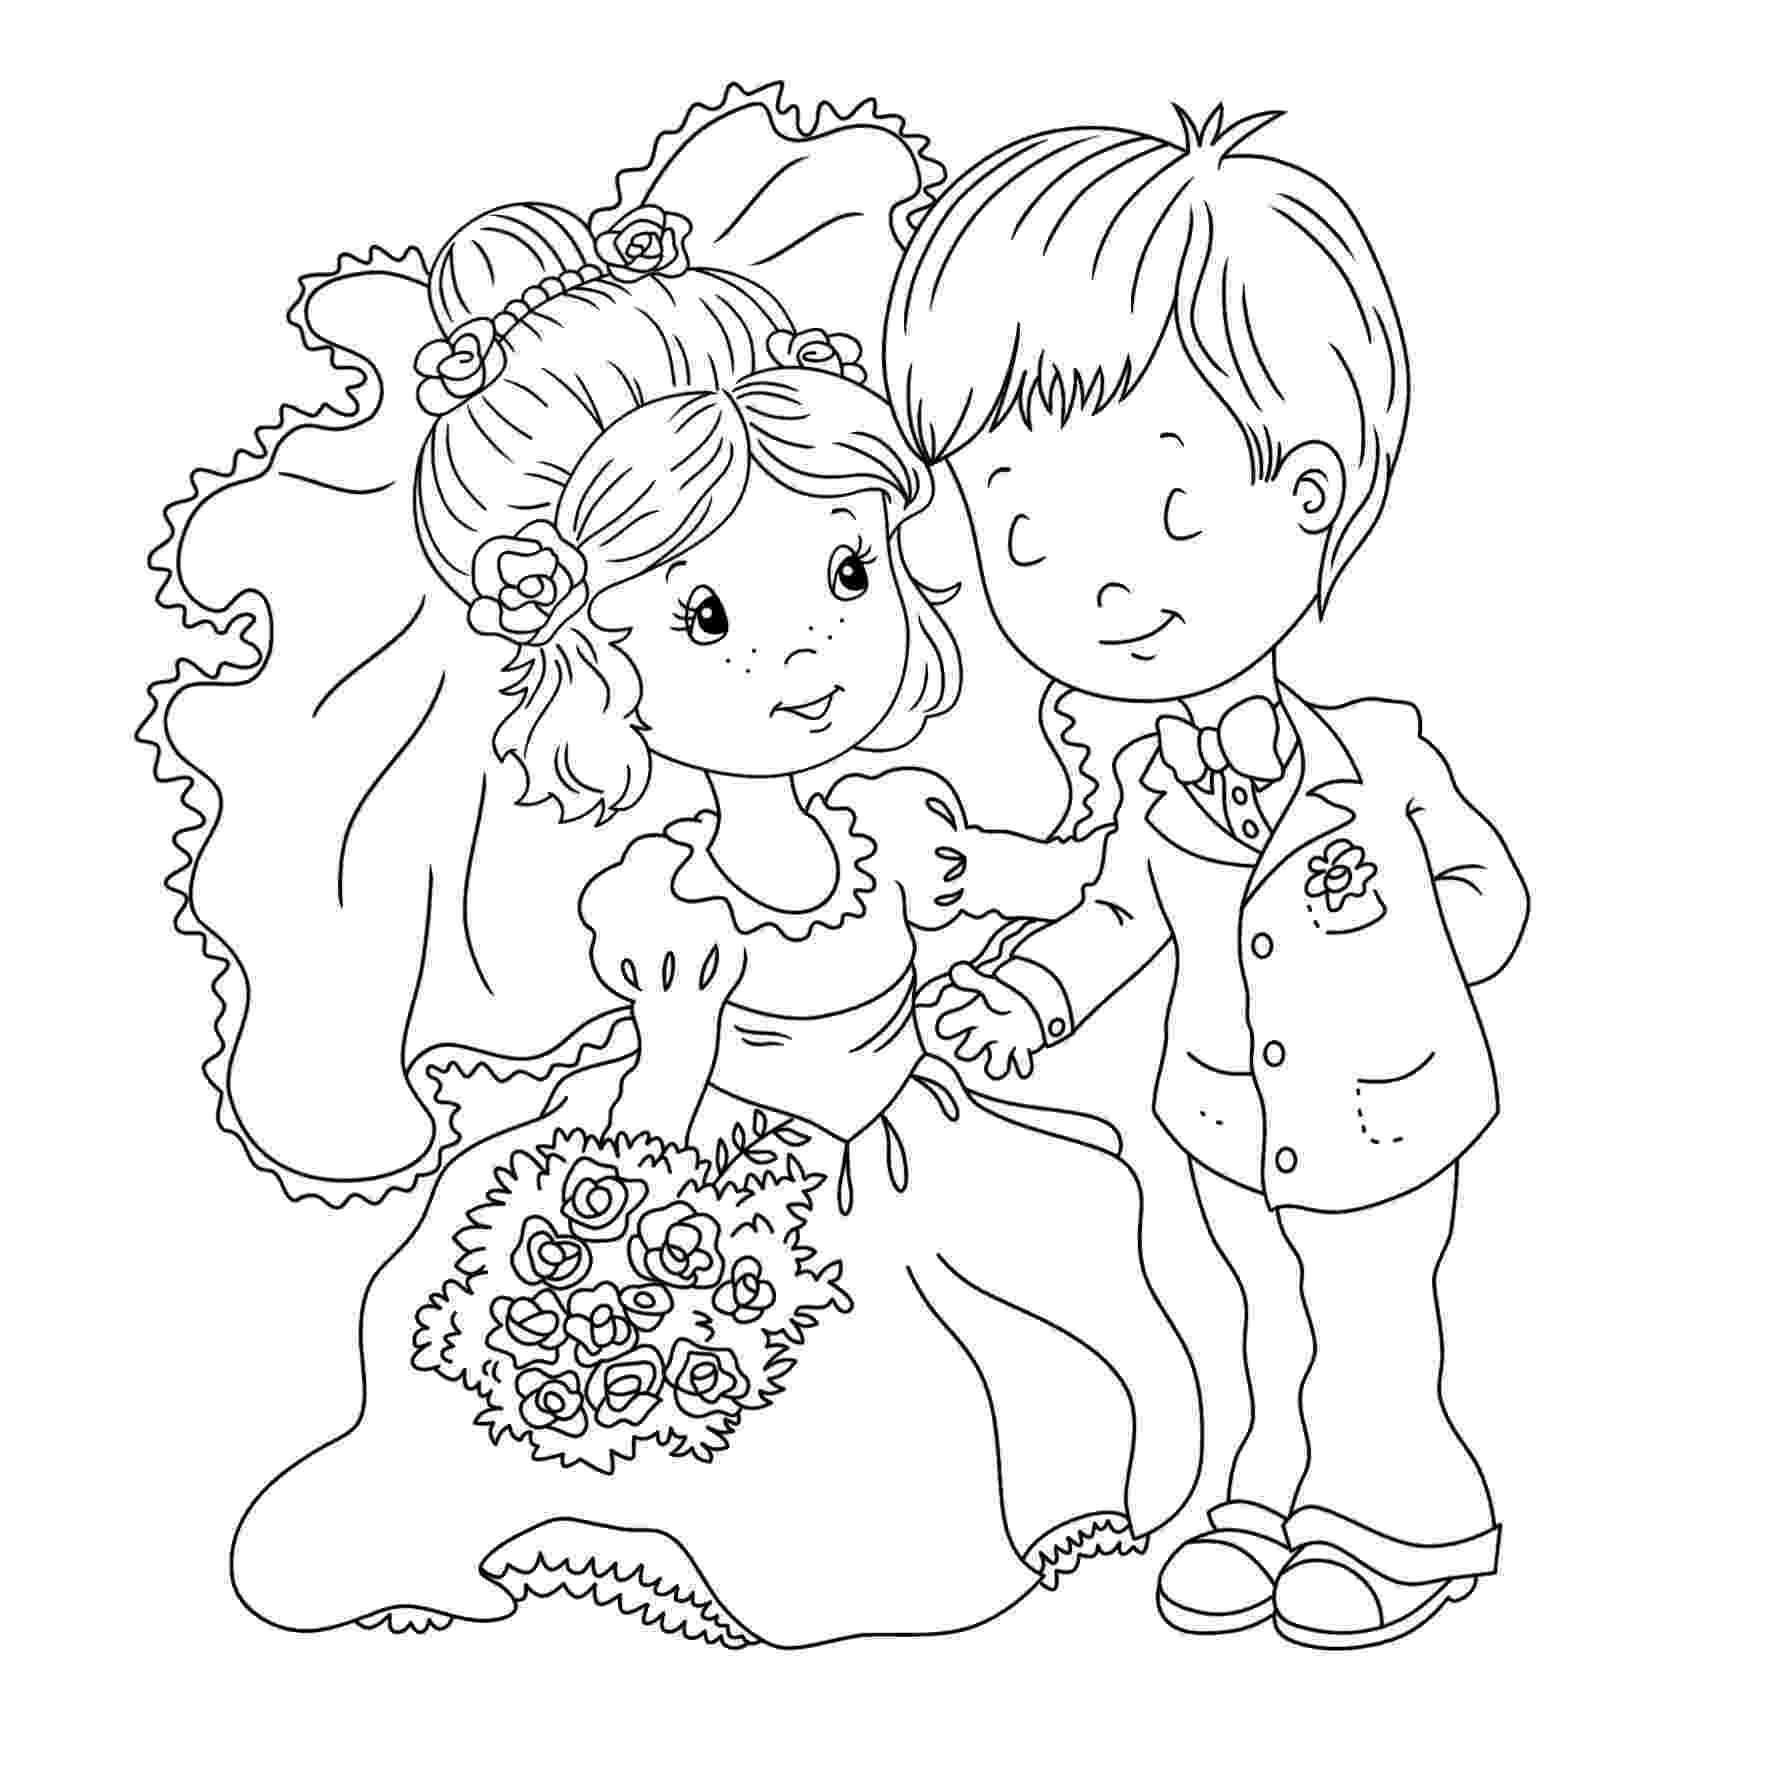 printable coloring sheets wedding 17 wedding coloring pages for kids who love to dream about coloring sheets wedding printable 